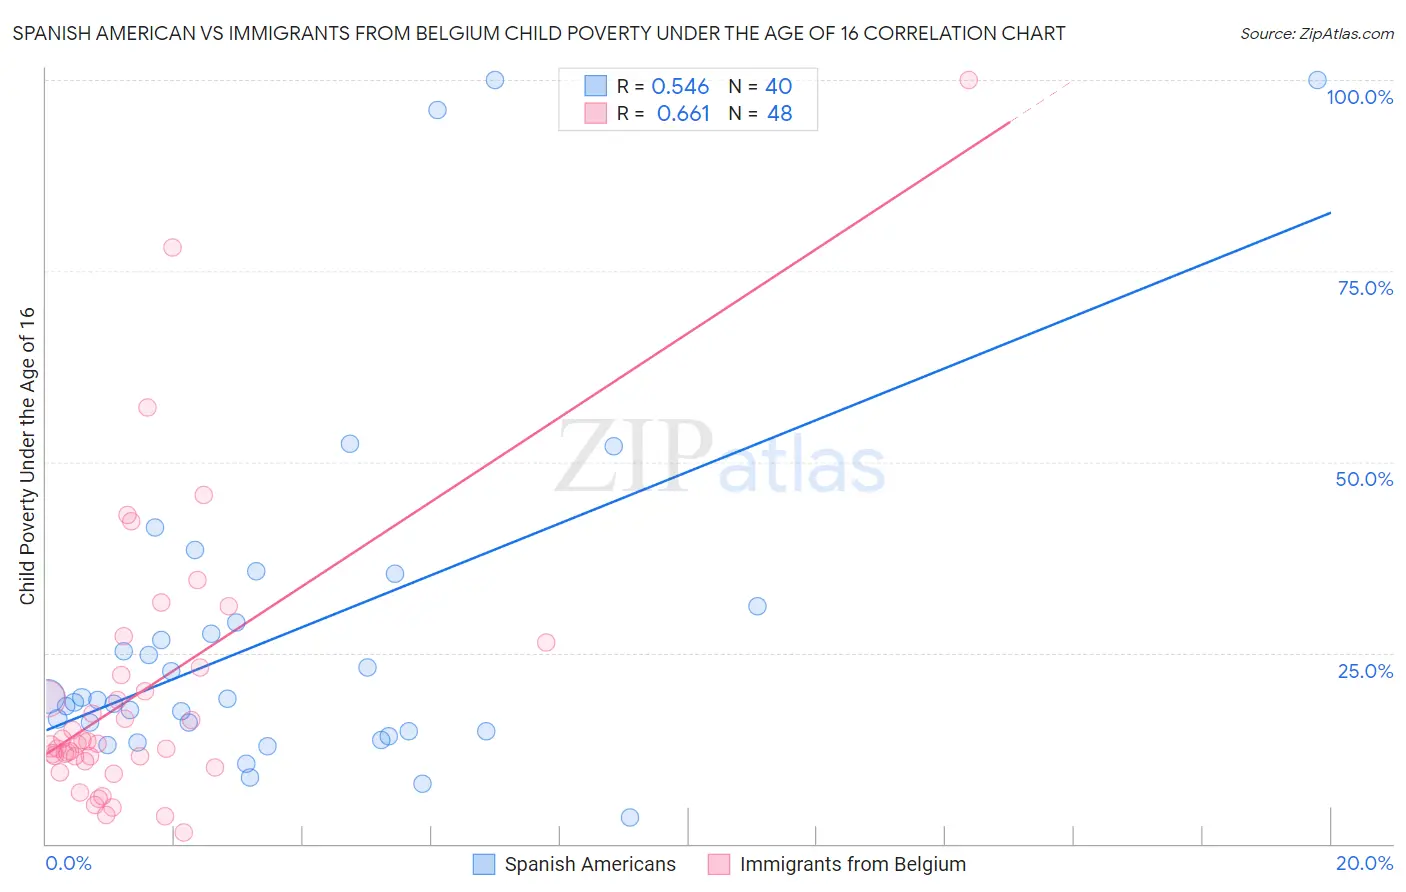 Spanish American vs Immigrants from Belgium Child Poverty Under the Age of 16